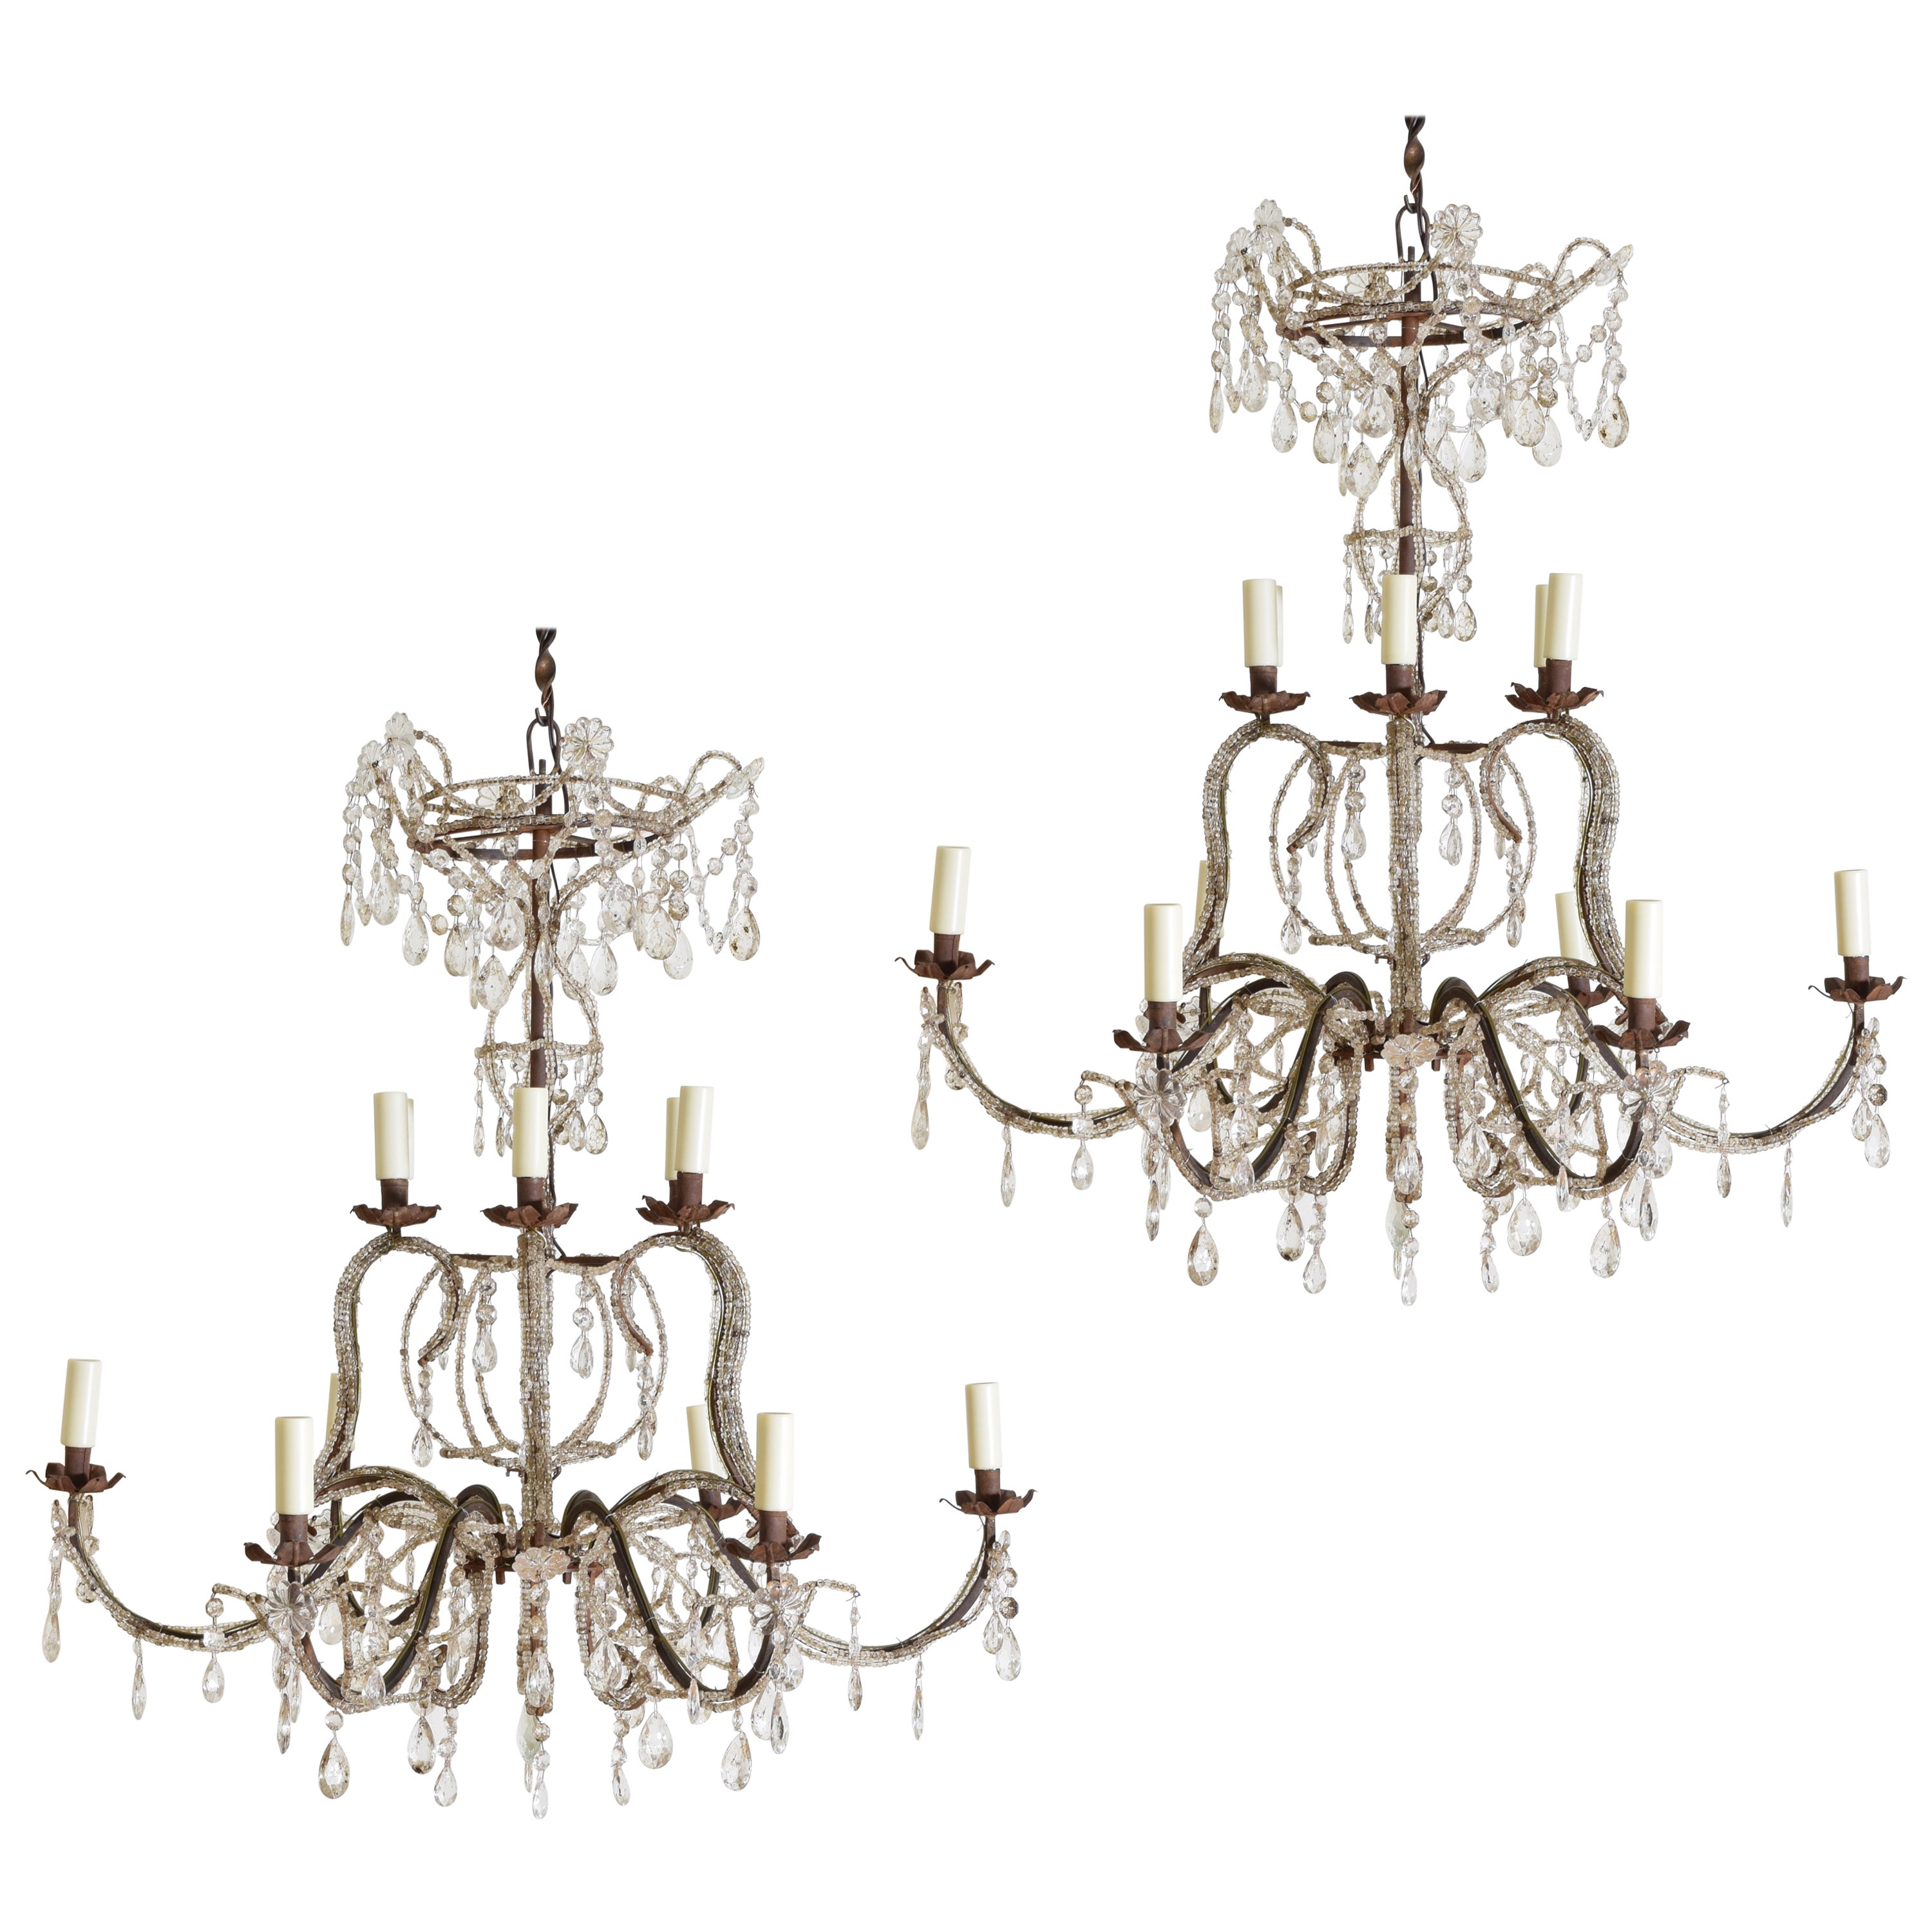 Pair of Italian, Genovese, 2-Tier, 12-Light Glass and Iron Chandeliers